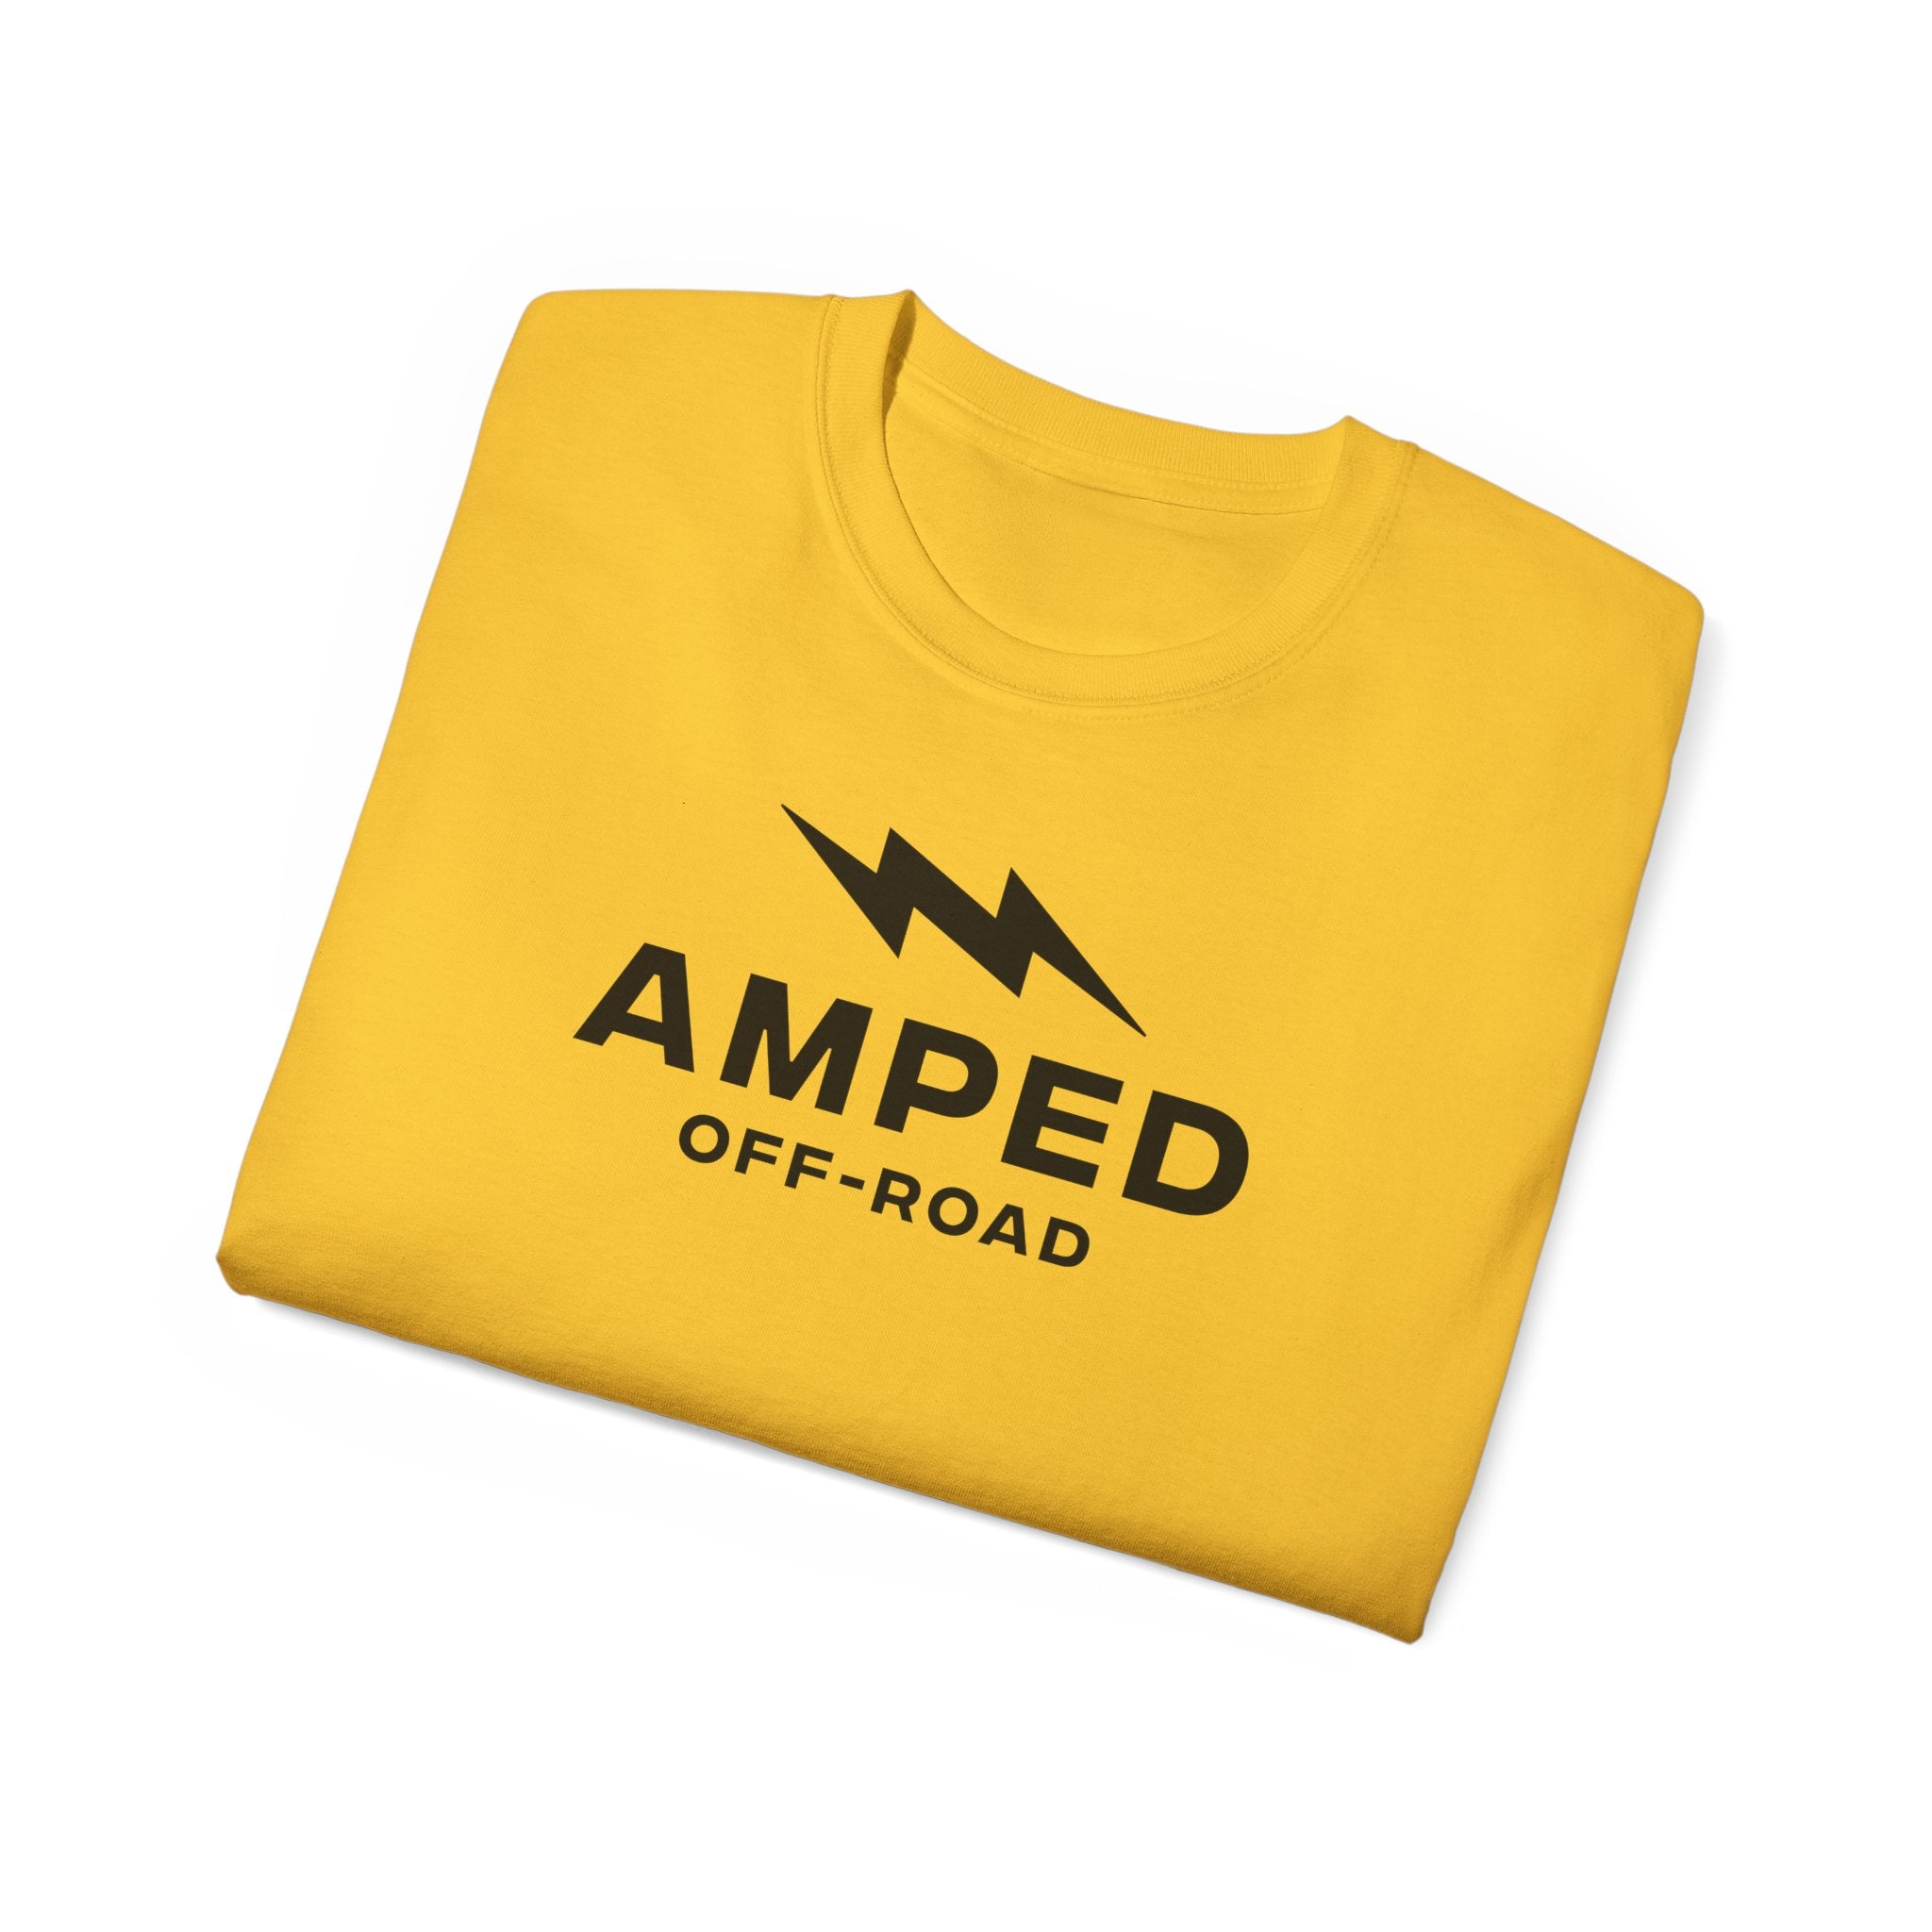 Amped Off-Road Ultra Cotton Tee